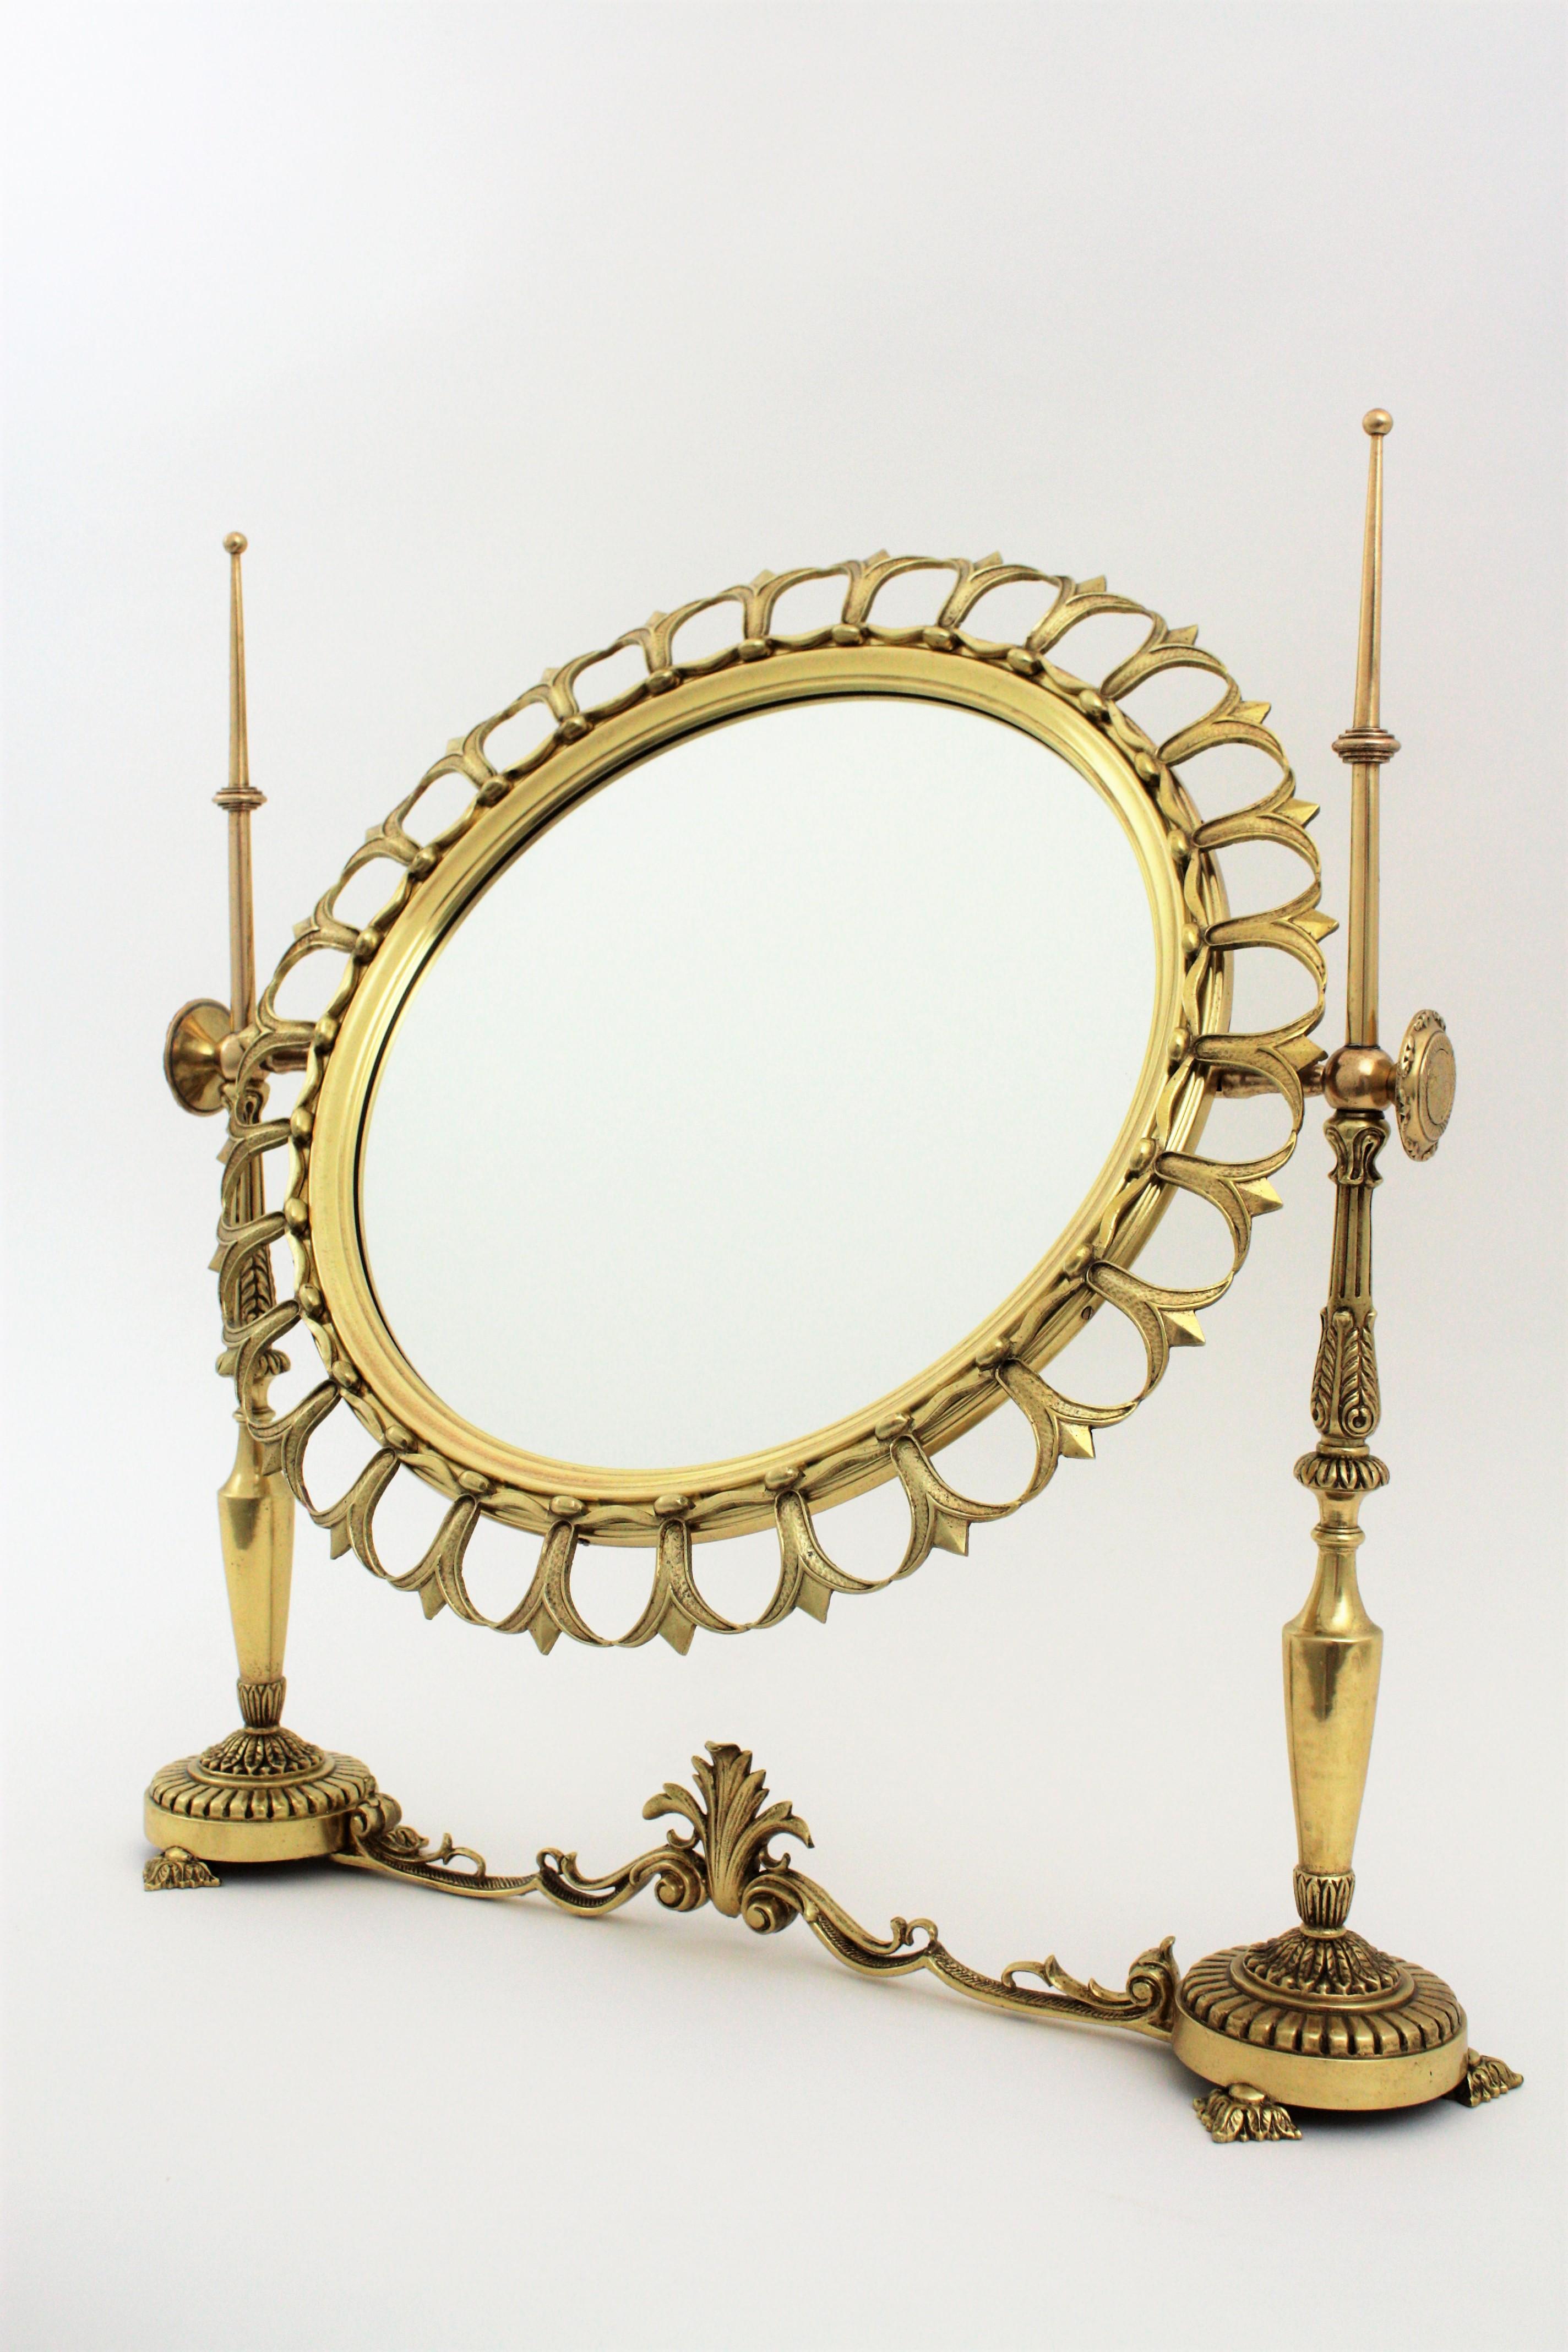 Neoclassical Sunburst Vanity or Table Mirror in Brass For Sale 3